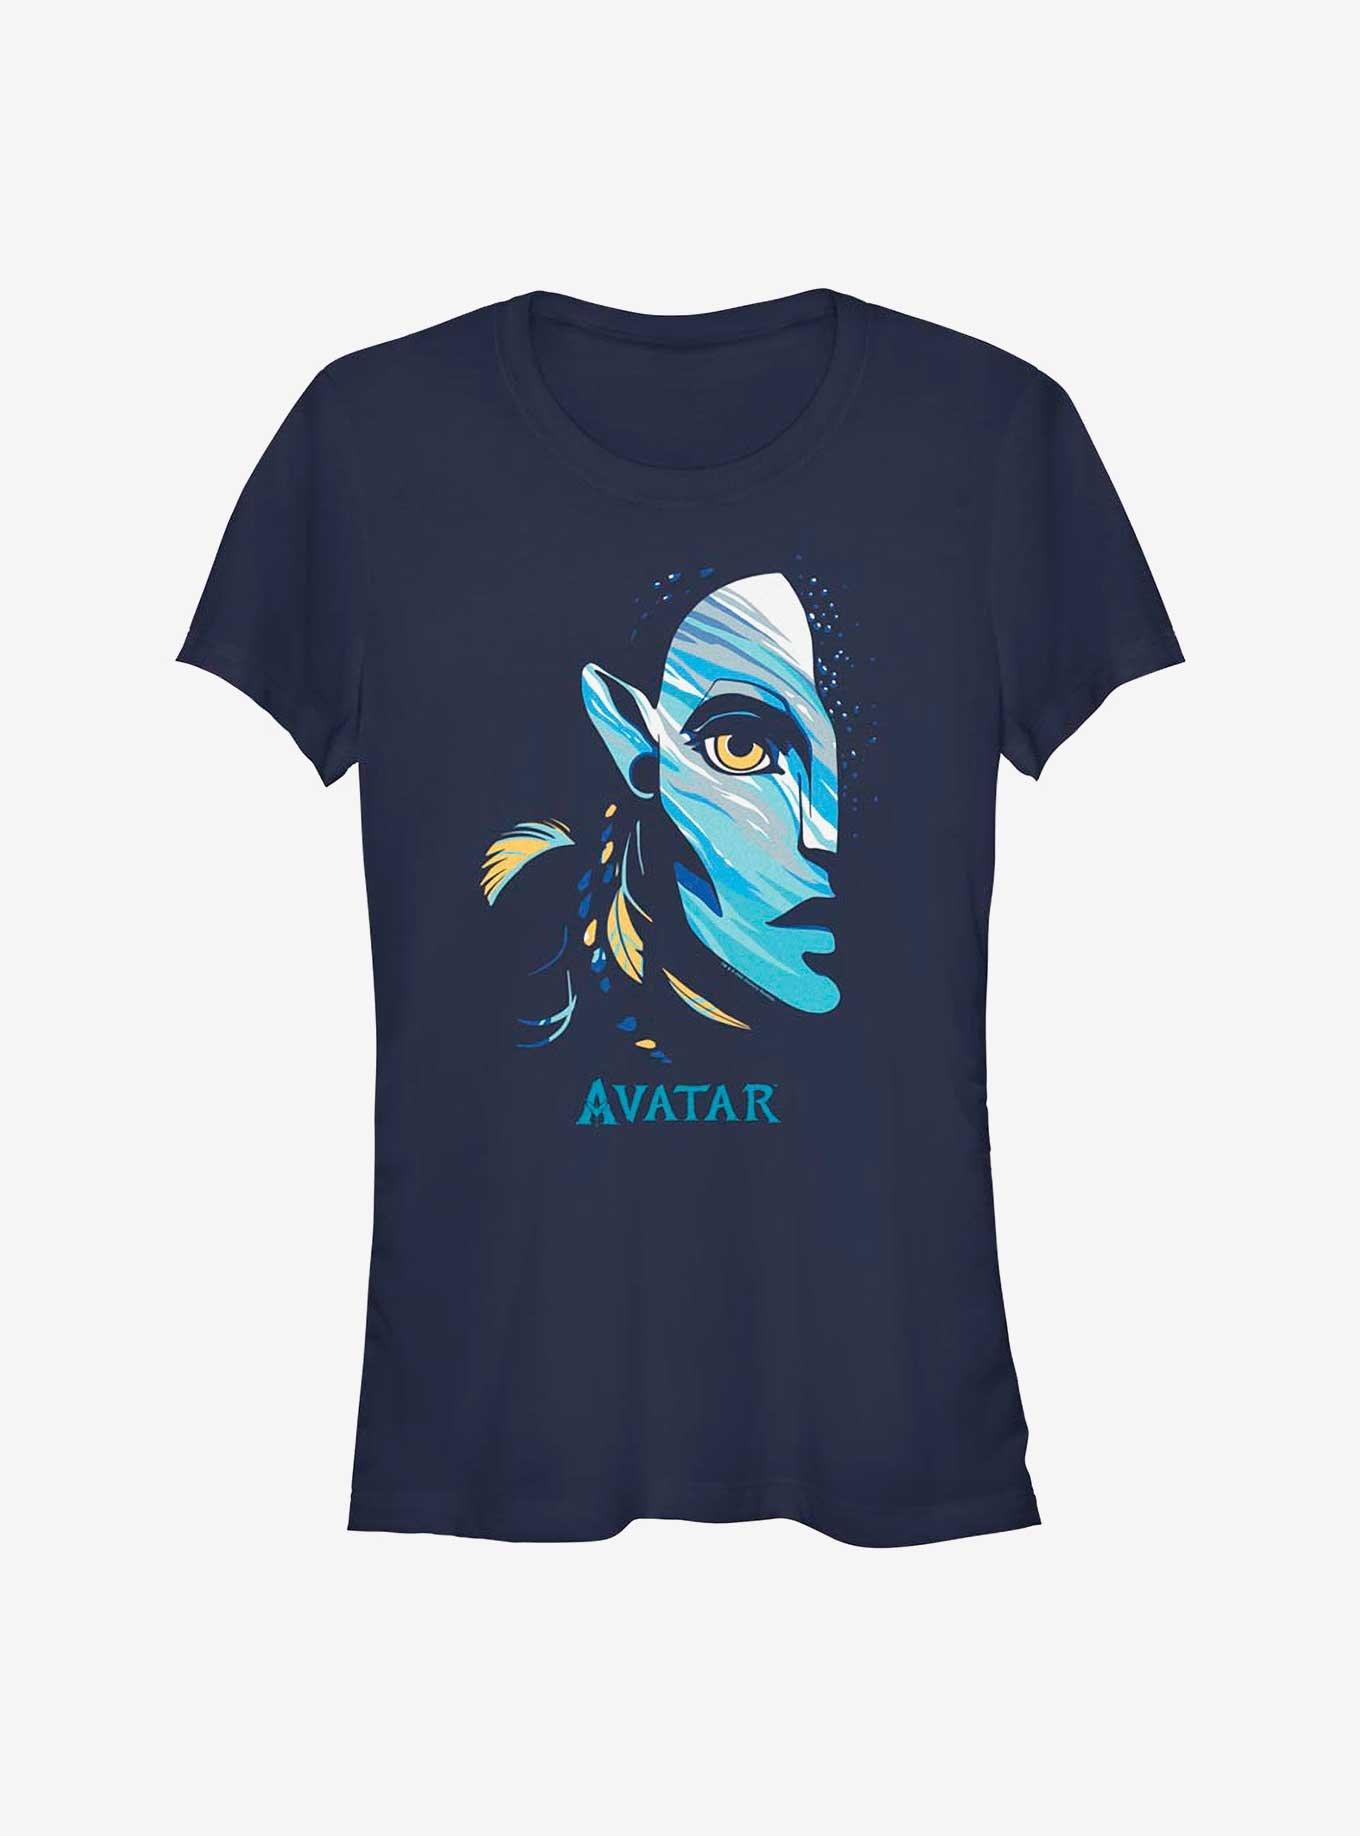 Avatar: The Way of Water Jake Sully Girls T-Shirt, NAVY, hi-res